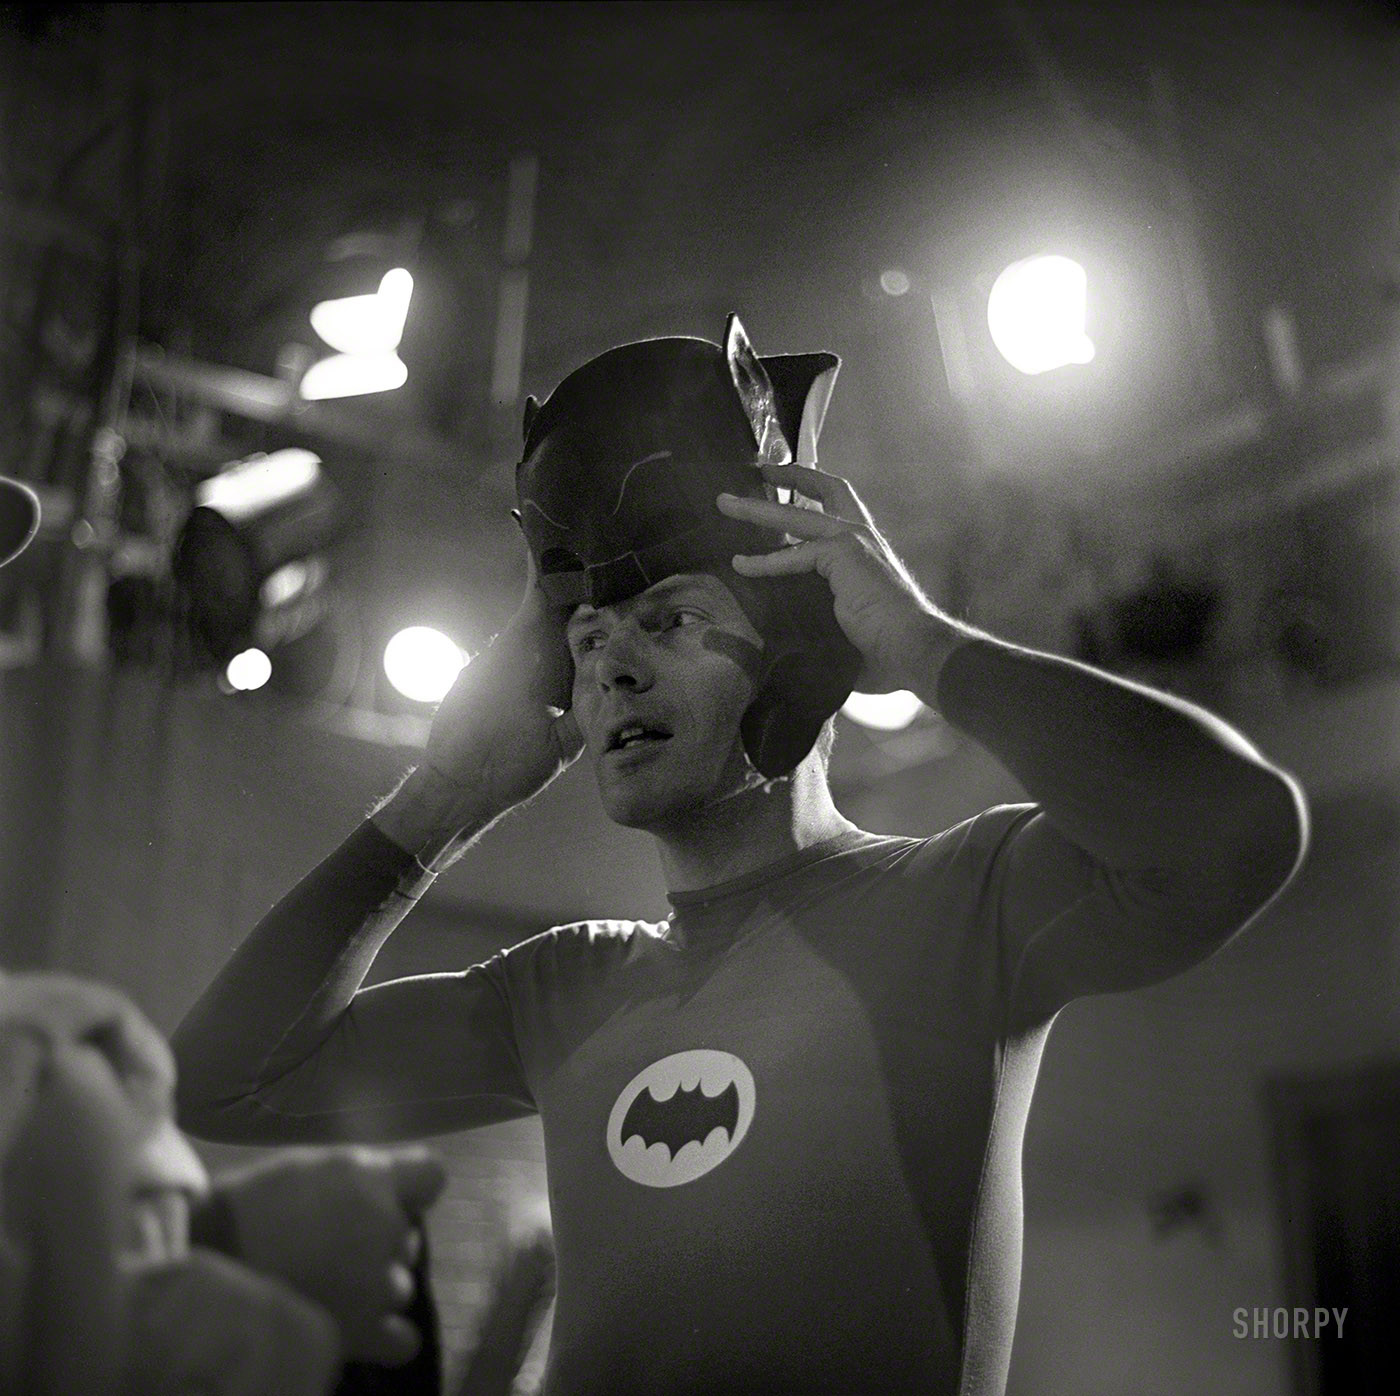 Adam West on the set of the movie "Batman" in 1966. From a series of photos taken by Richard Hewett for Look magazine. View full size.